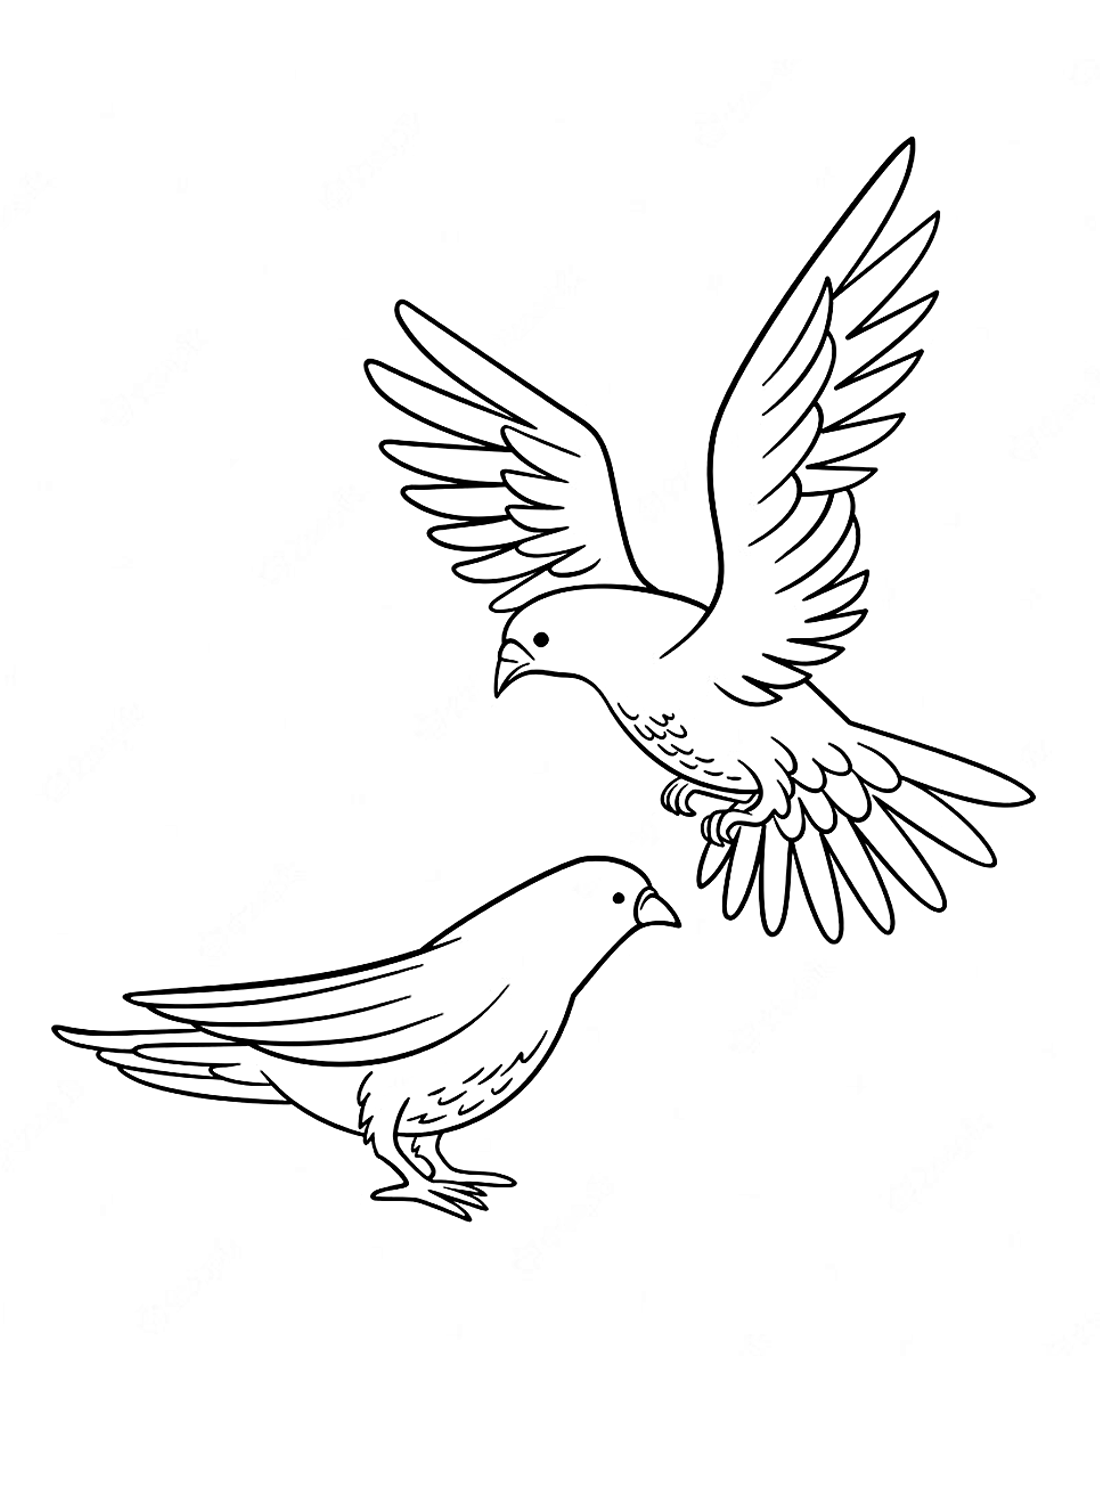 A dove couple Coloring Page